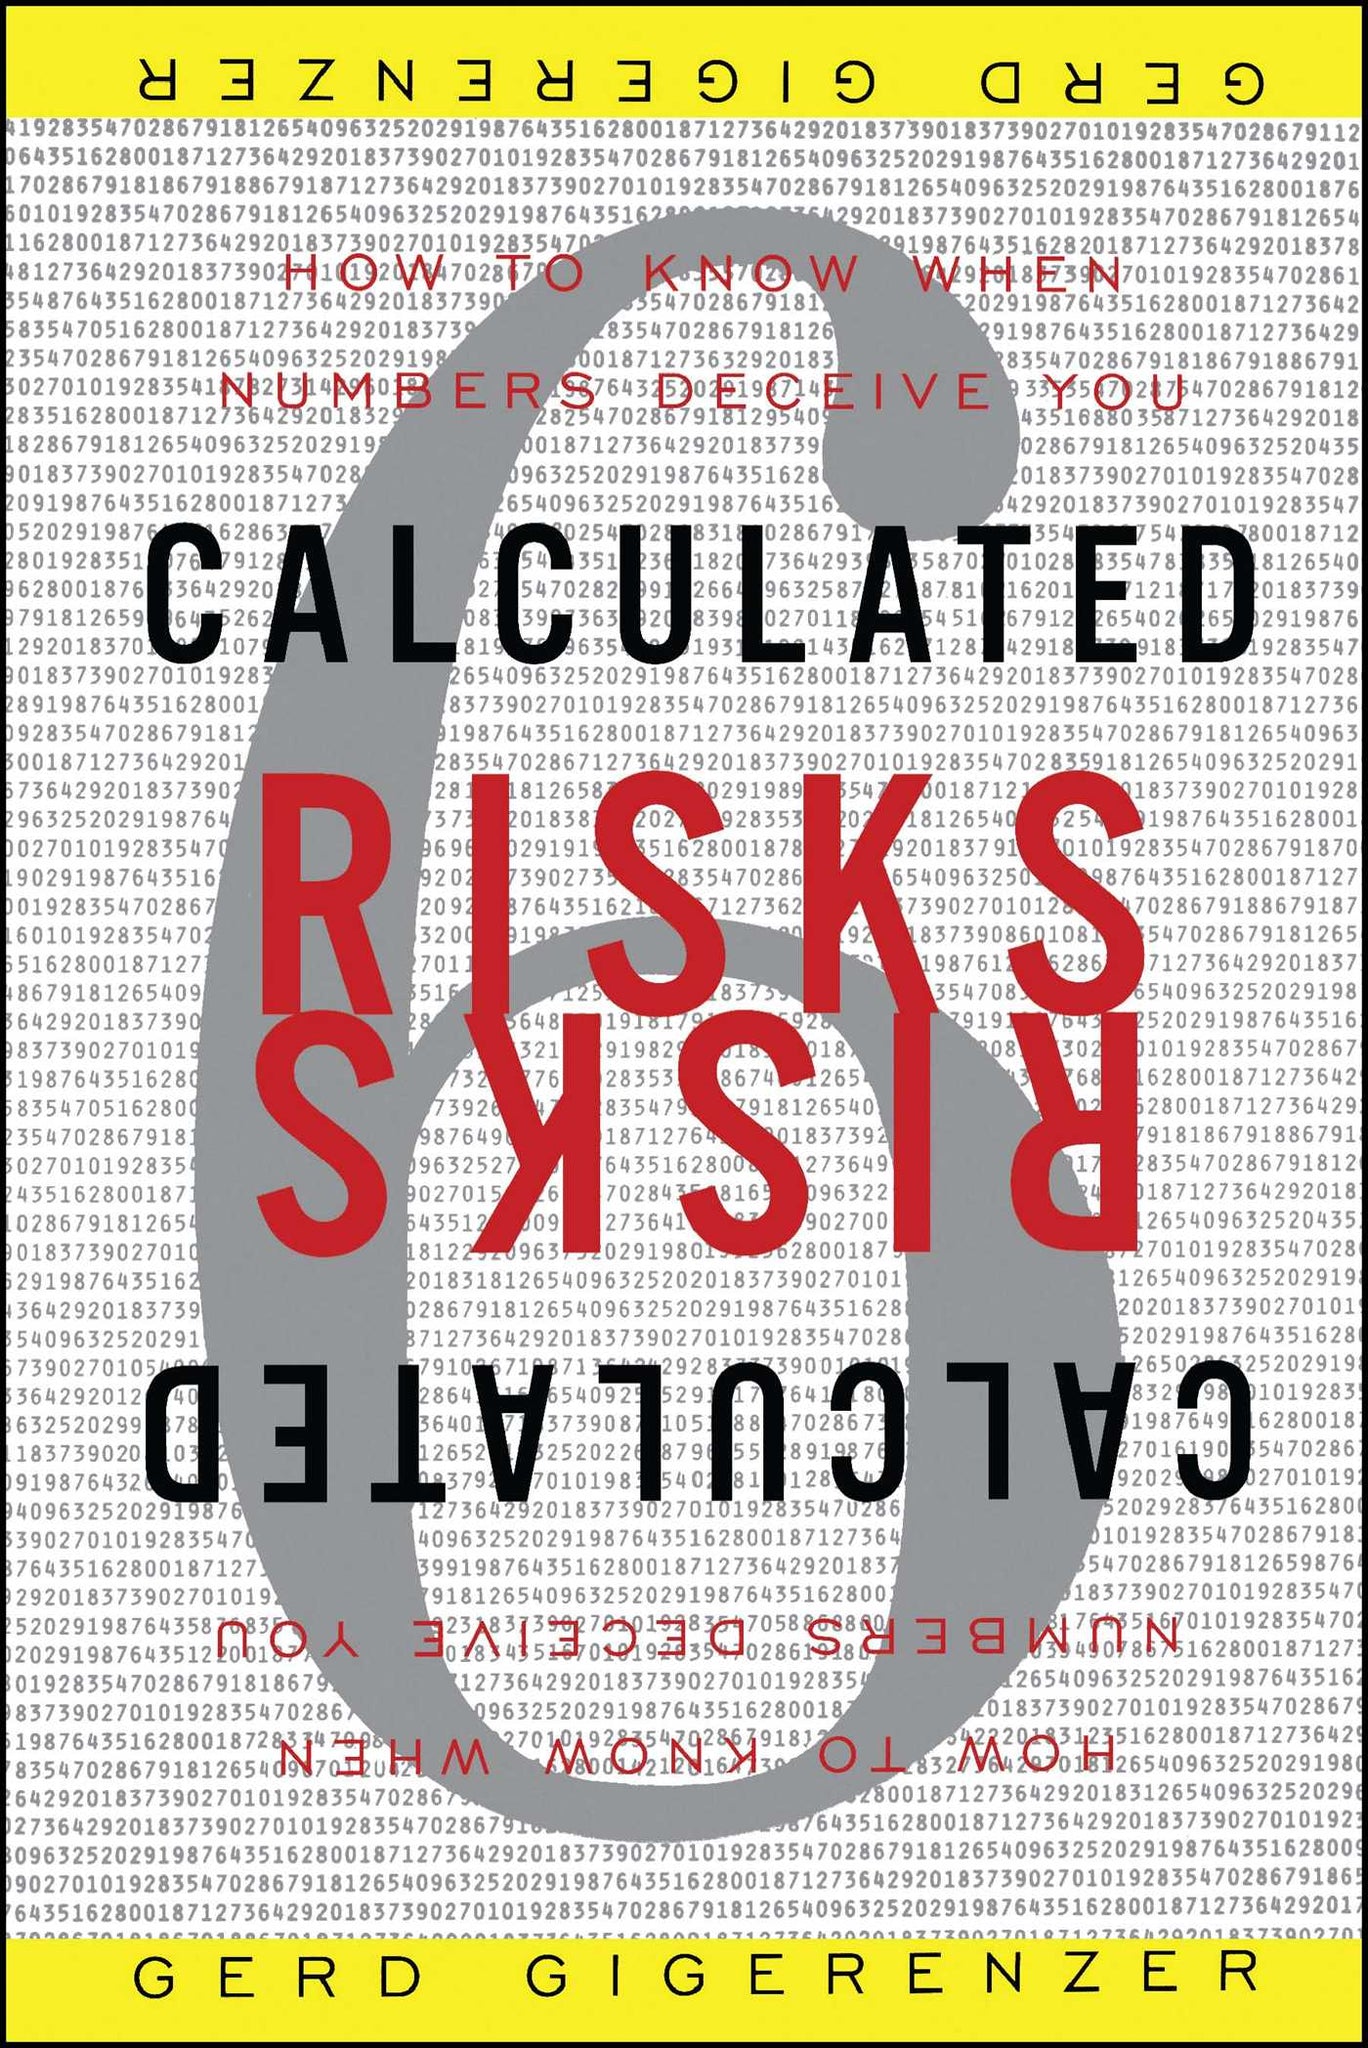 Calculated Risks : How to Know When Numbers Deceive You